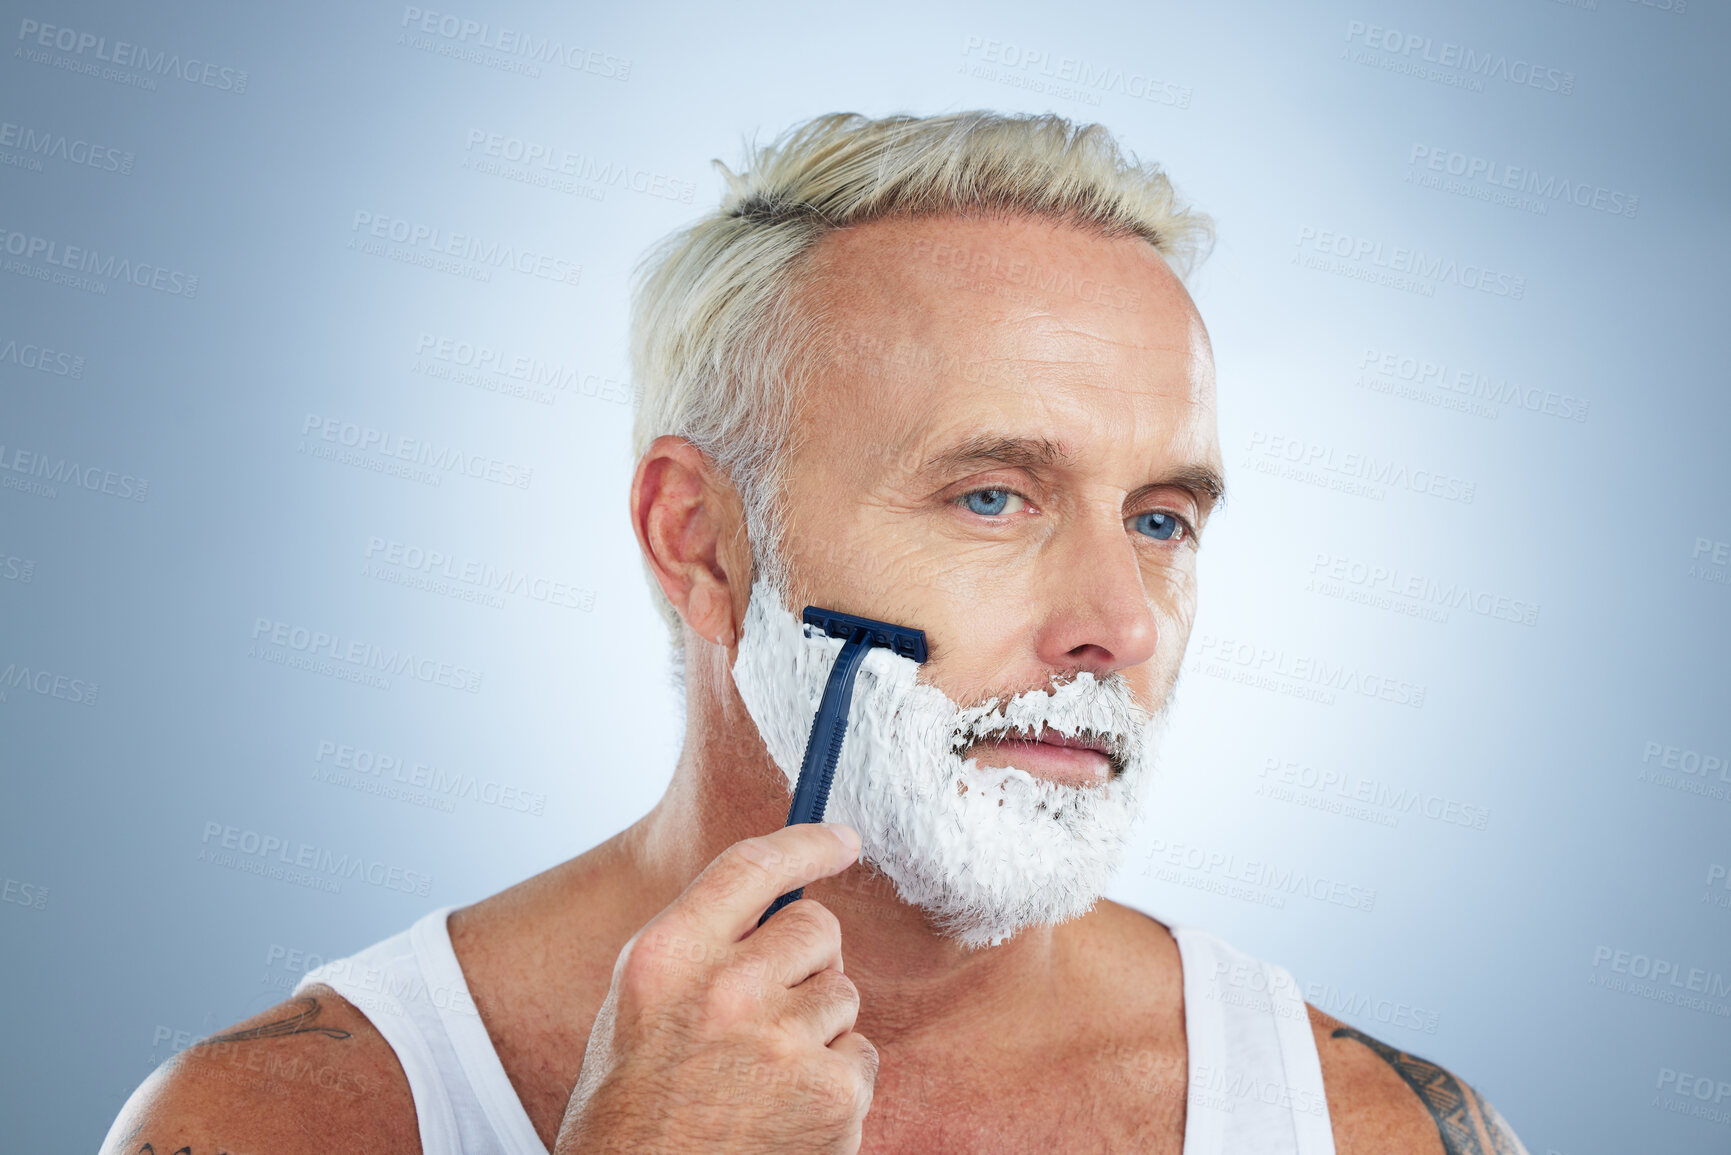 Buy stock photo Senior man, razor and shaving cream for beard grooming, skincare or hair removal against a studio background. Mature male face with shaver, creme or foam product for clean hygiene or facial treatment